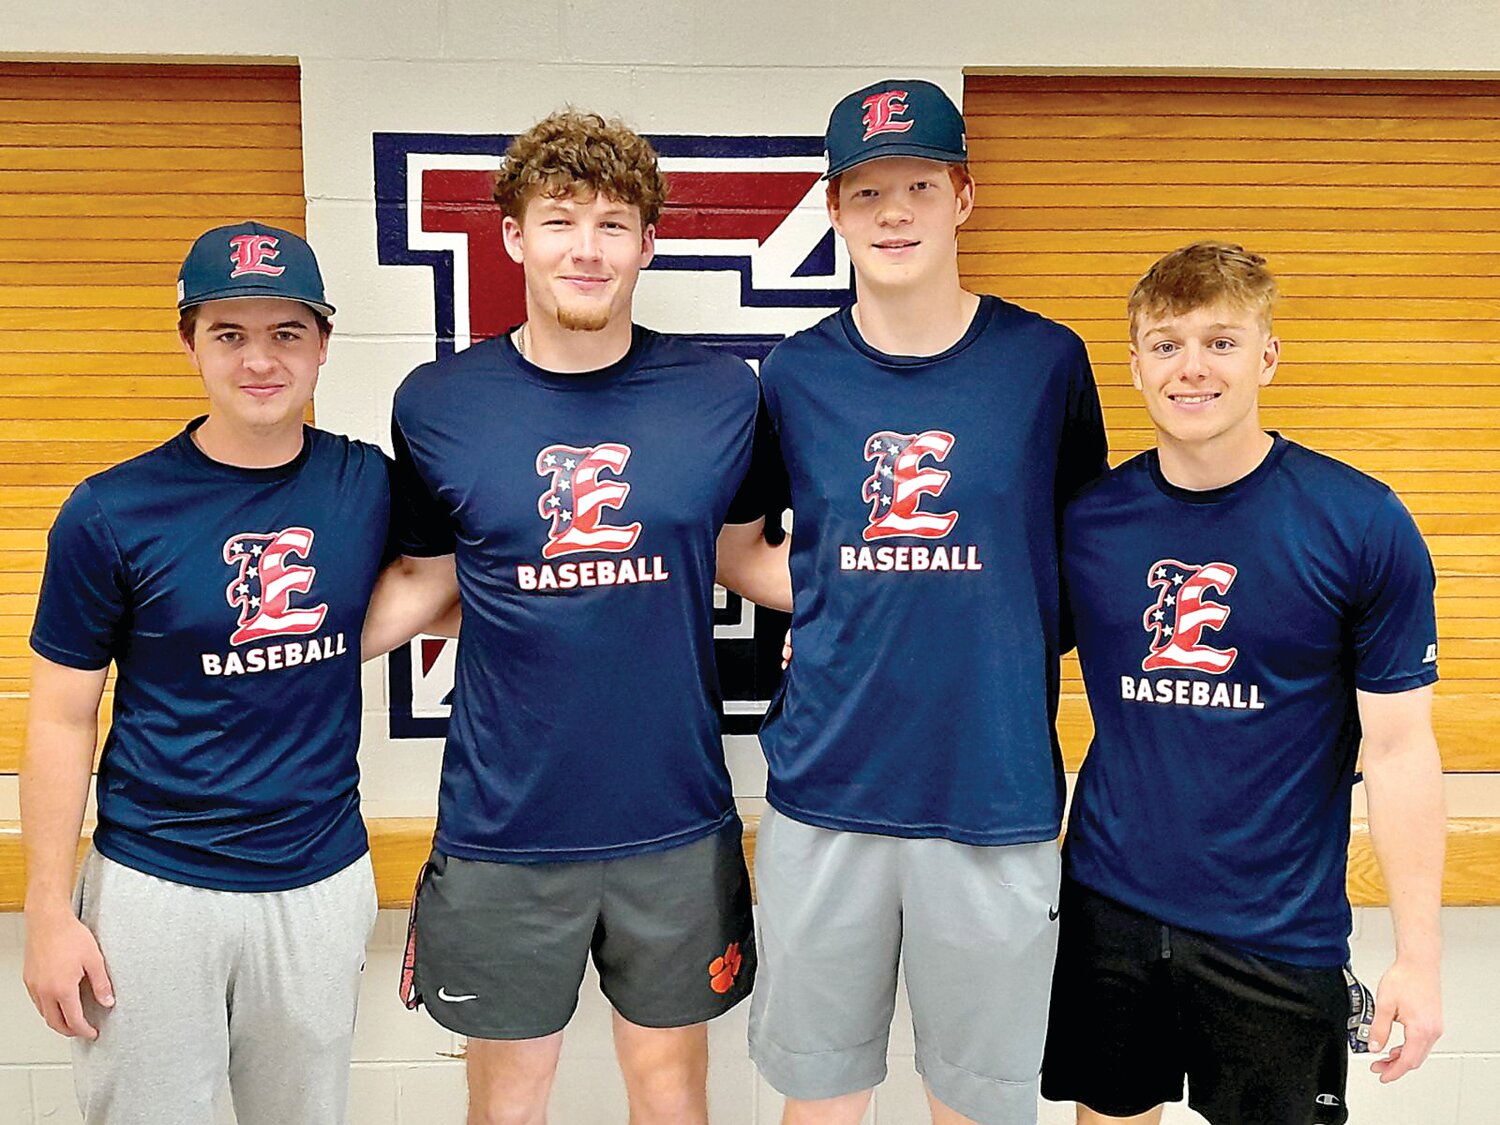 From left are: Sam Bliss, Chase Harlan, Damian Frayne and Reece Moody.